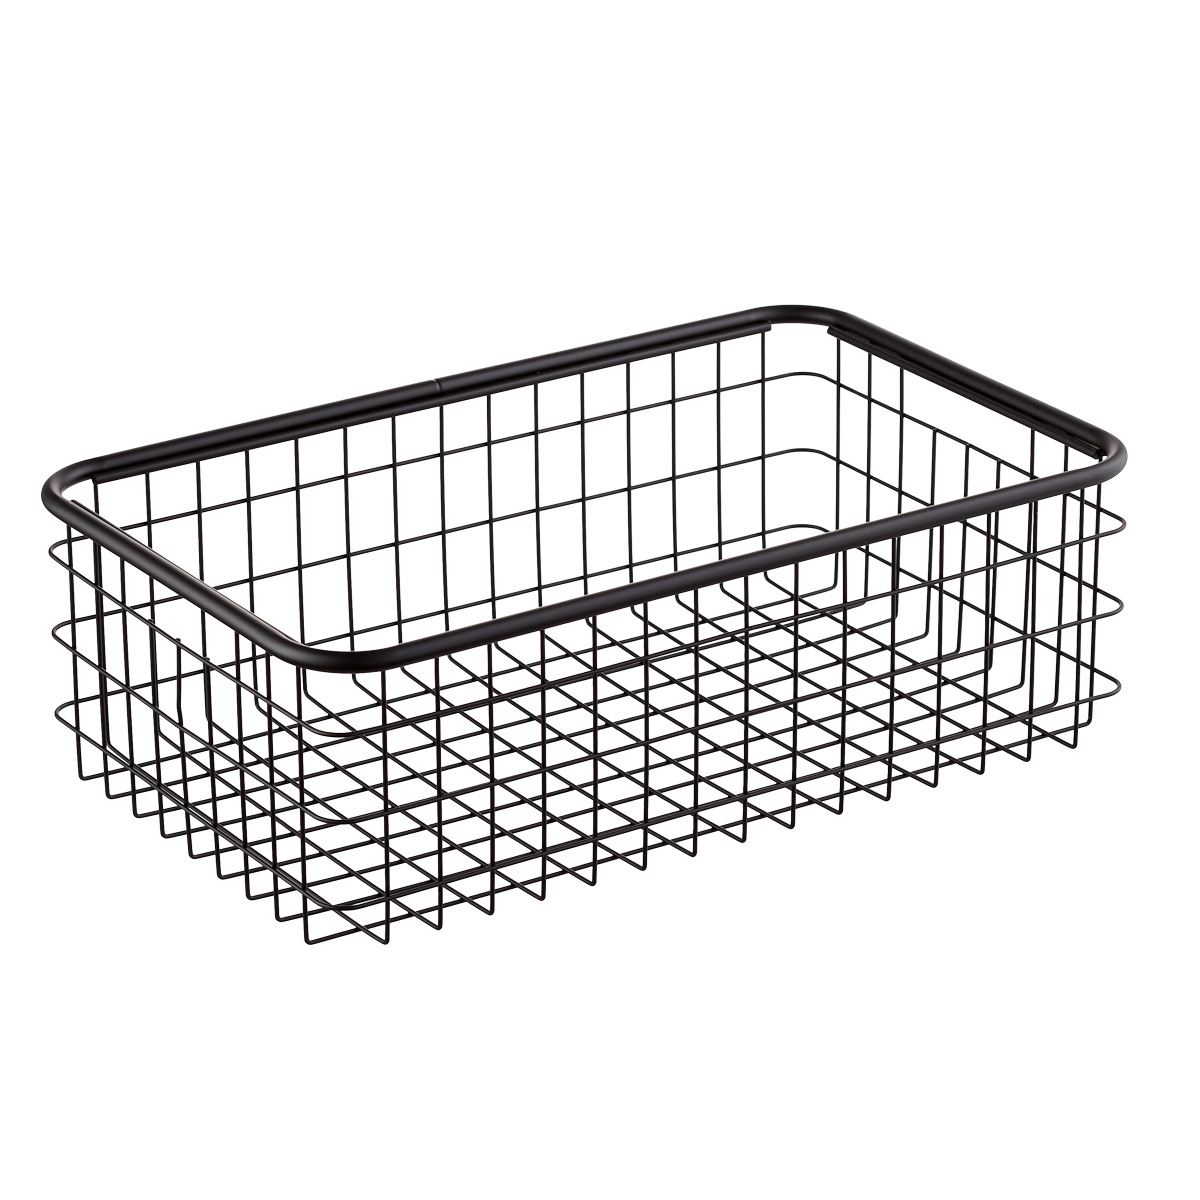 https://images.containerstore.com/catalogimages?sku=10079453